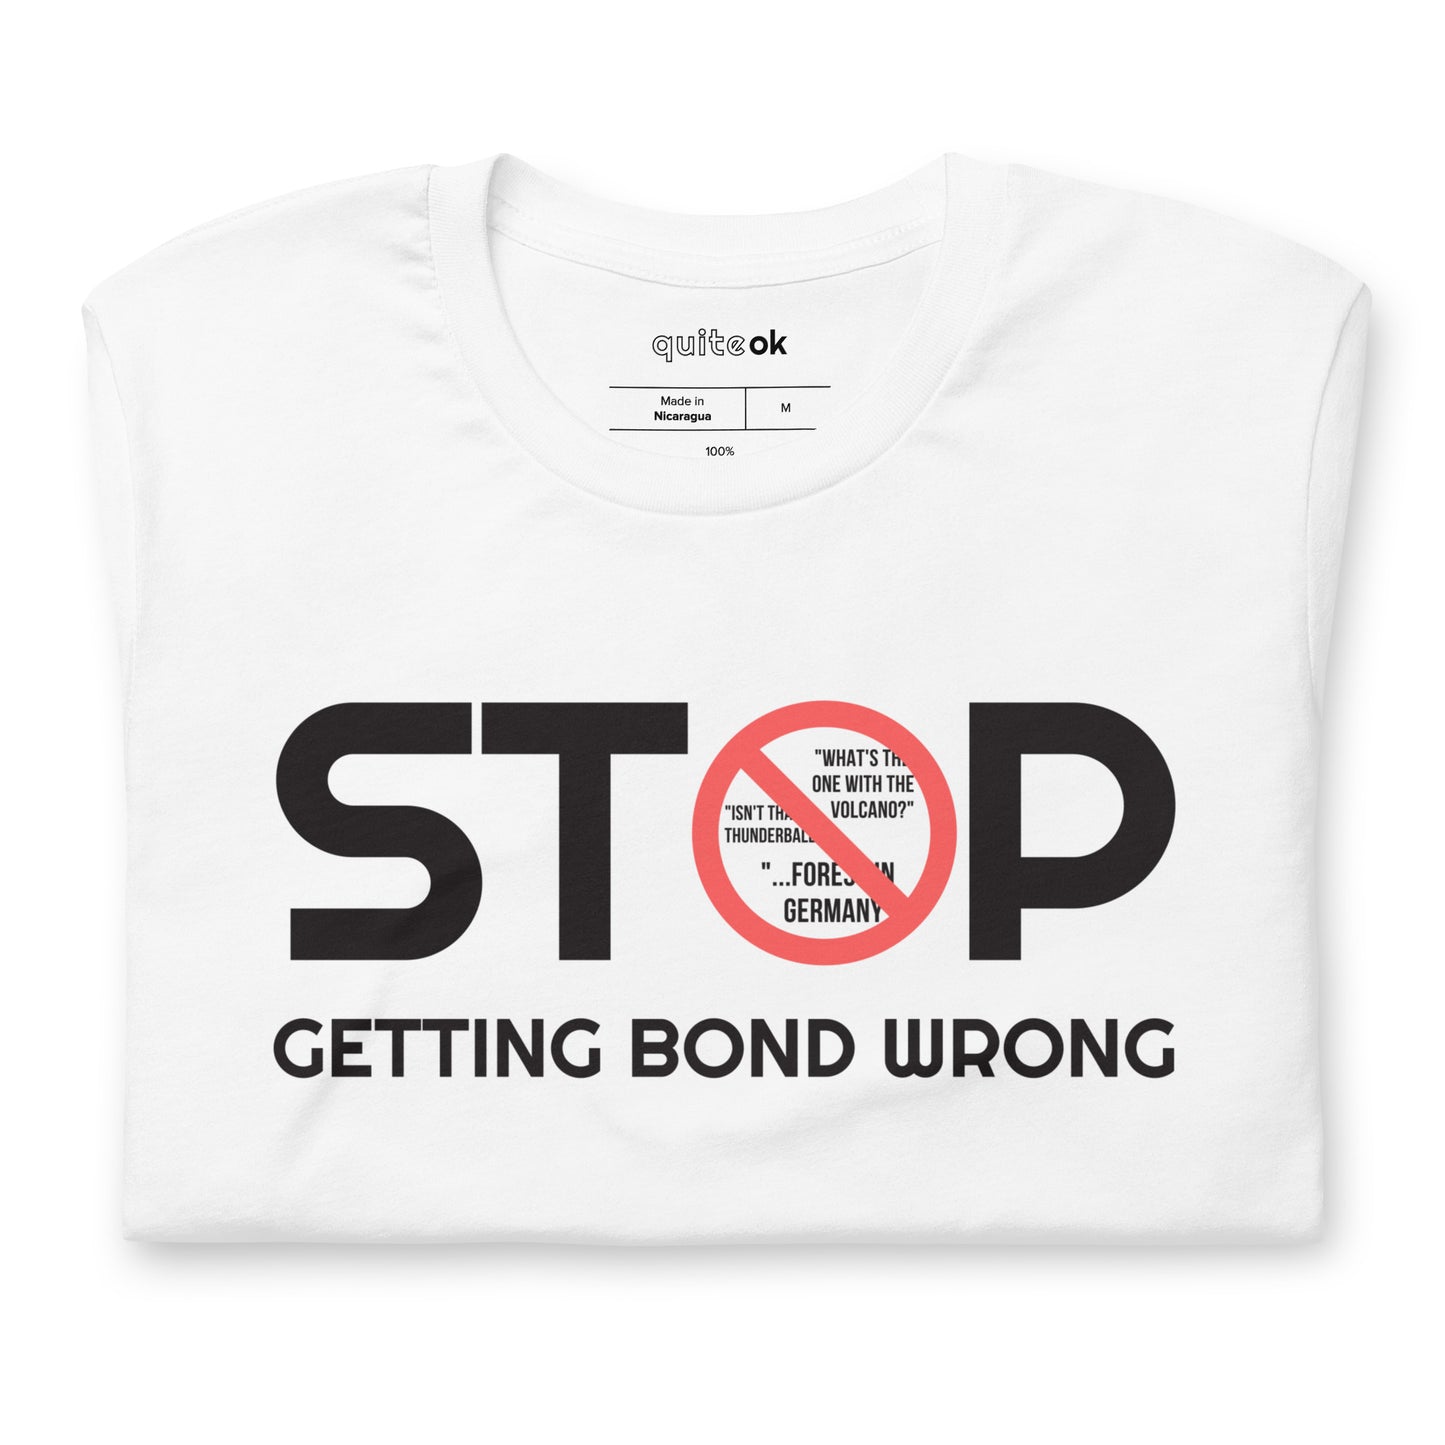 Stop Getting Bond Wrong Comedy Quote T-Shirt